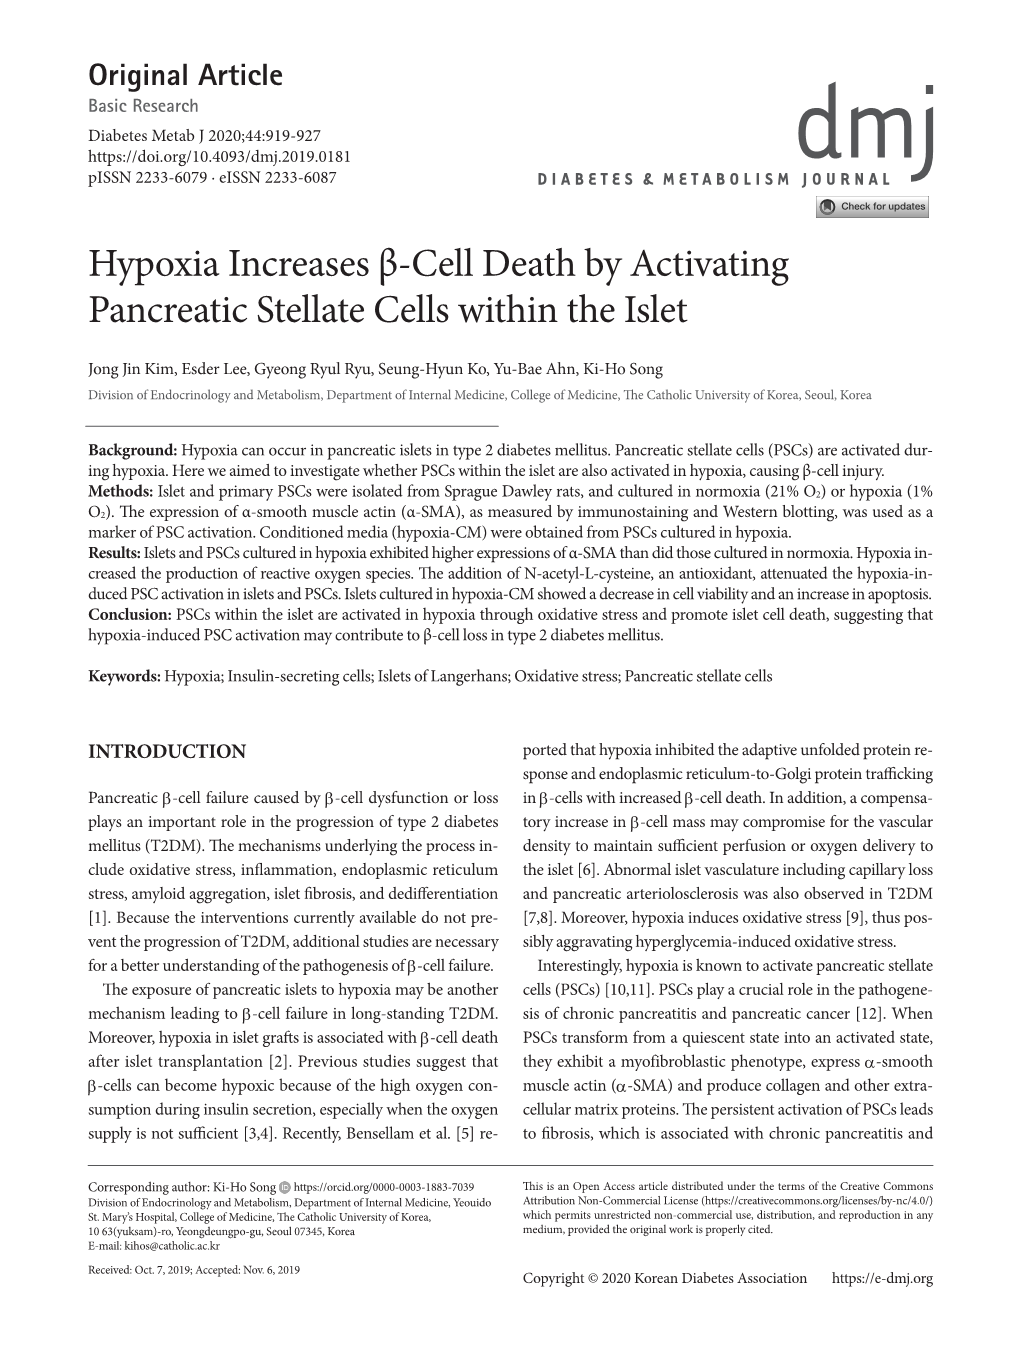 Hypoxia Increases Β-Cell Death by Activating Pancreatic Stellate Cells Within the Islet